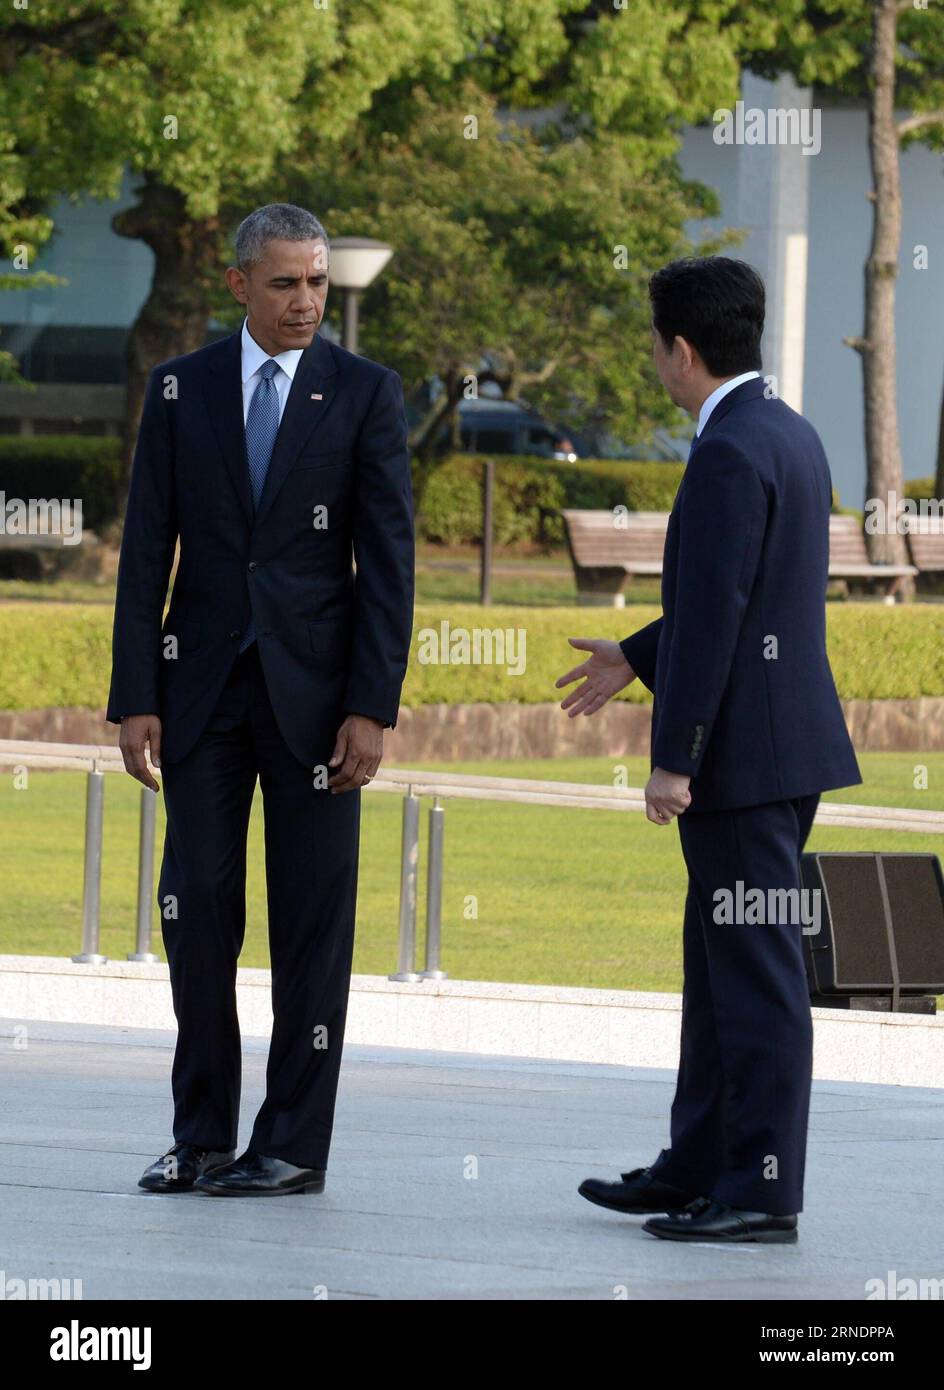 (160528) -- HIROSHIMA, May 28, 2016 -- Japanese Prime Minister Shinzo Abe (R) and visiting President of the United States Barack Obama visit the Hiroshima Peace Memorial Park in Hiroshima, Japan on May 27, 2016. Barack Obama on Friday became the first incumbent U.S. president to visit Hiroshima since America dropped an atomic bomb on the city 71 years ago, stirring mixed feelings among the United States, Japan and the victim countries during WWII. ) JAPAN-HIROSHIMA-OBAMA-VISIT MaxPing PUBLICATIONxNOTxINxCHN   Hiroshima May 28 2016 Japanese Prime Ministers Shinzo ABE r and Visiting President of Stock Photo